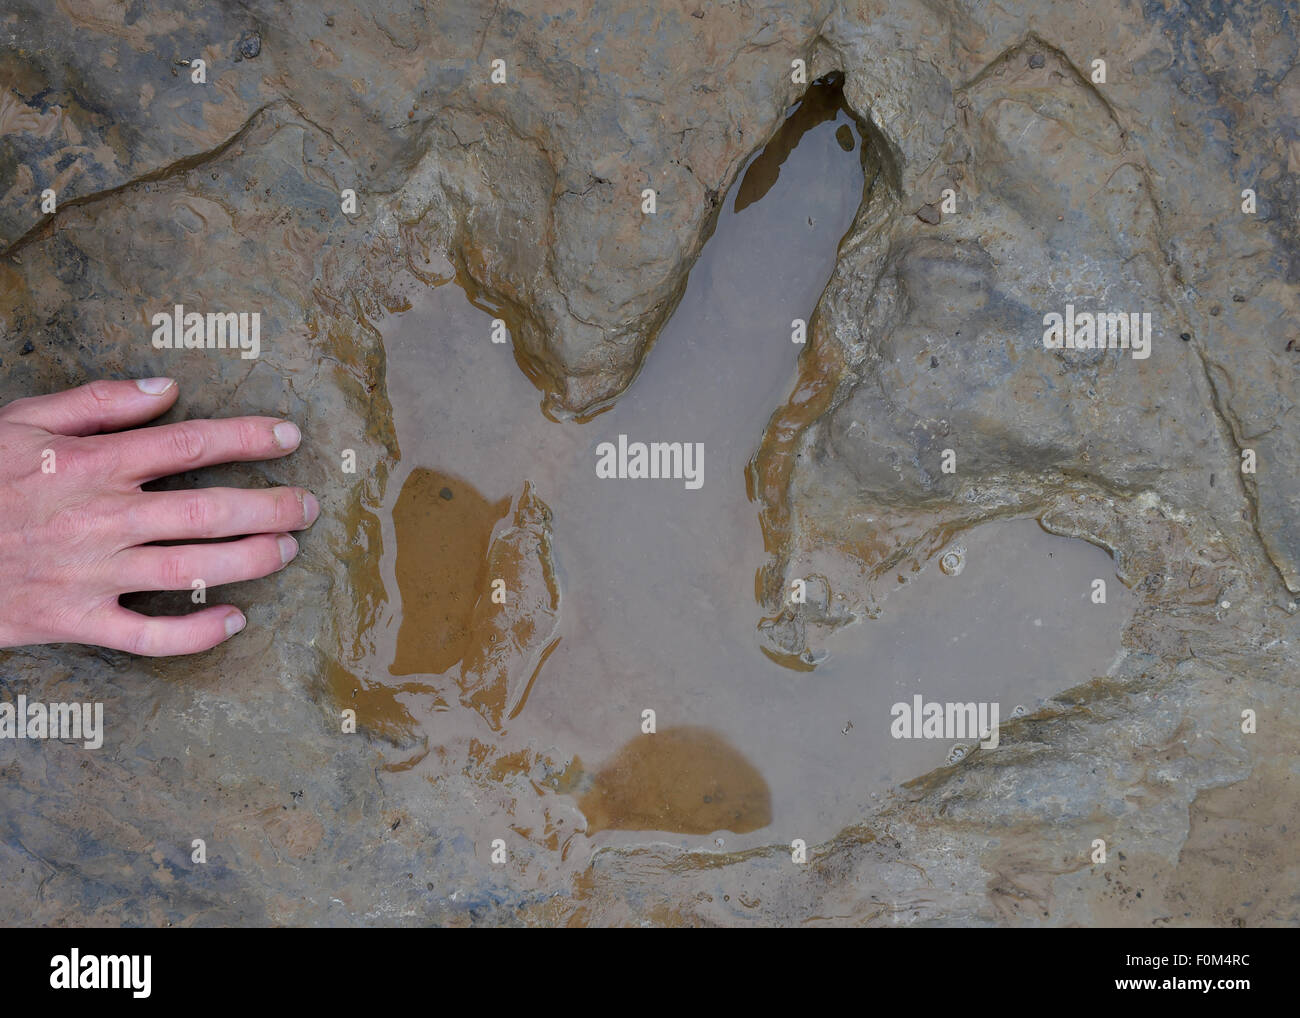 Muenchehagen, Hannover, Germany. 17th Aug, 2015. A fossilized footprint of a dinosaur in a quarry in Muenchehagen, Hannover, Germany, 17 August 2015. The footprints are believed to have been created somewhere between 135 to 145 million years ago and have a diameter of up to 1.2 meters. Credit:  dpa picture alliance/Alamy Live News Stock Photo